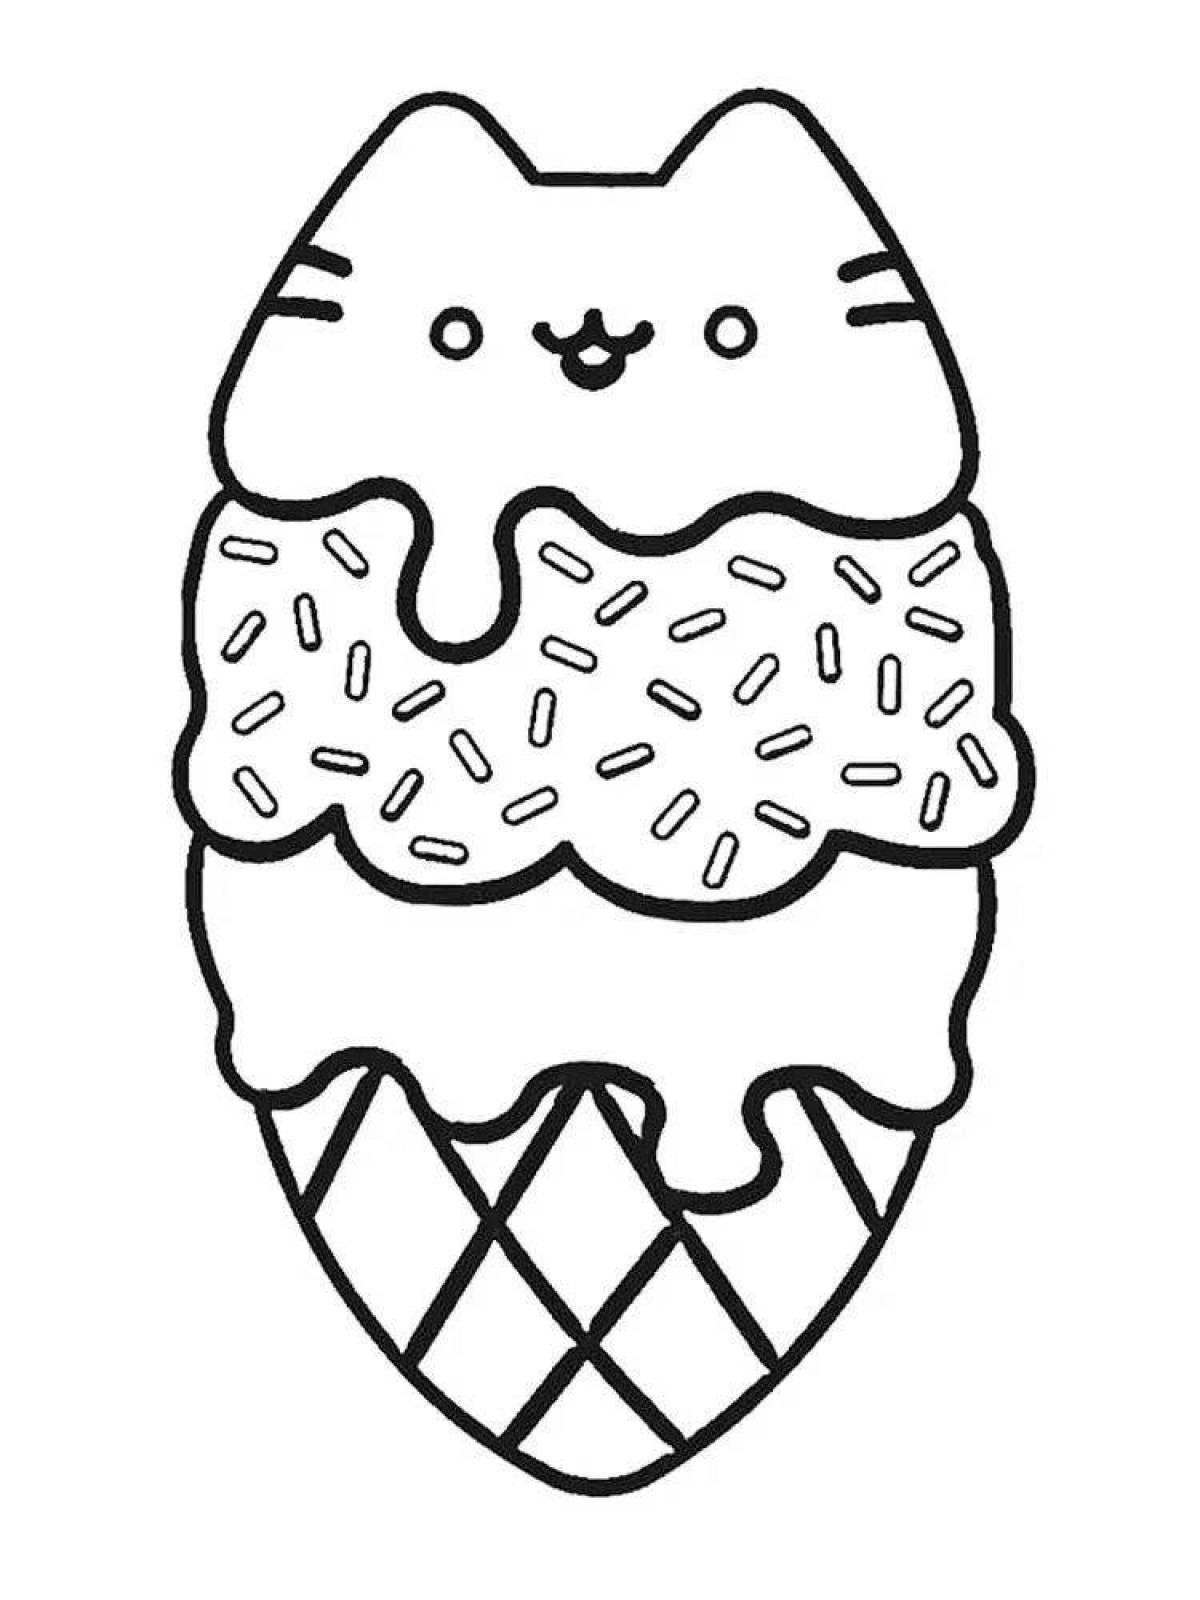 Sweet cat donut coloring page